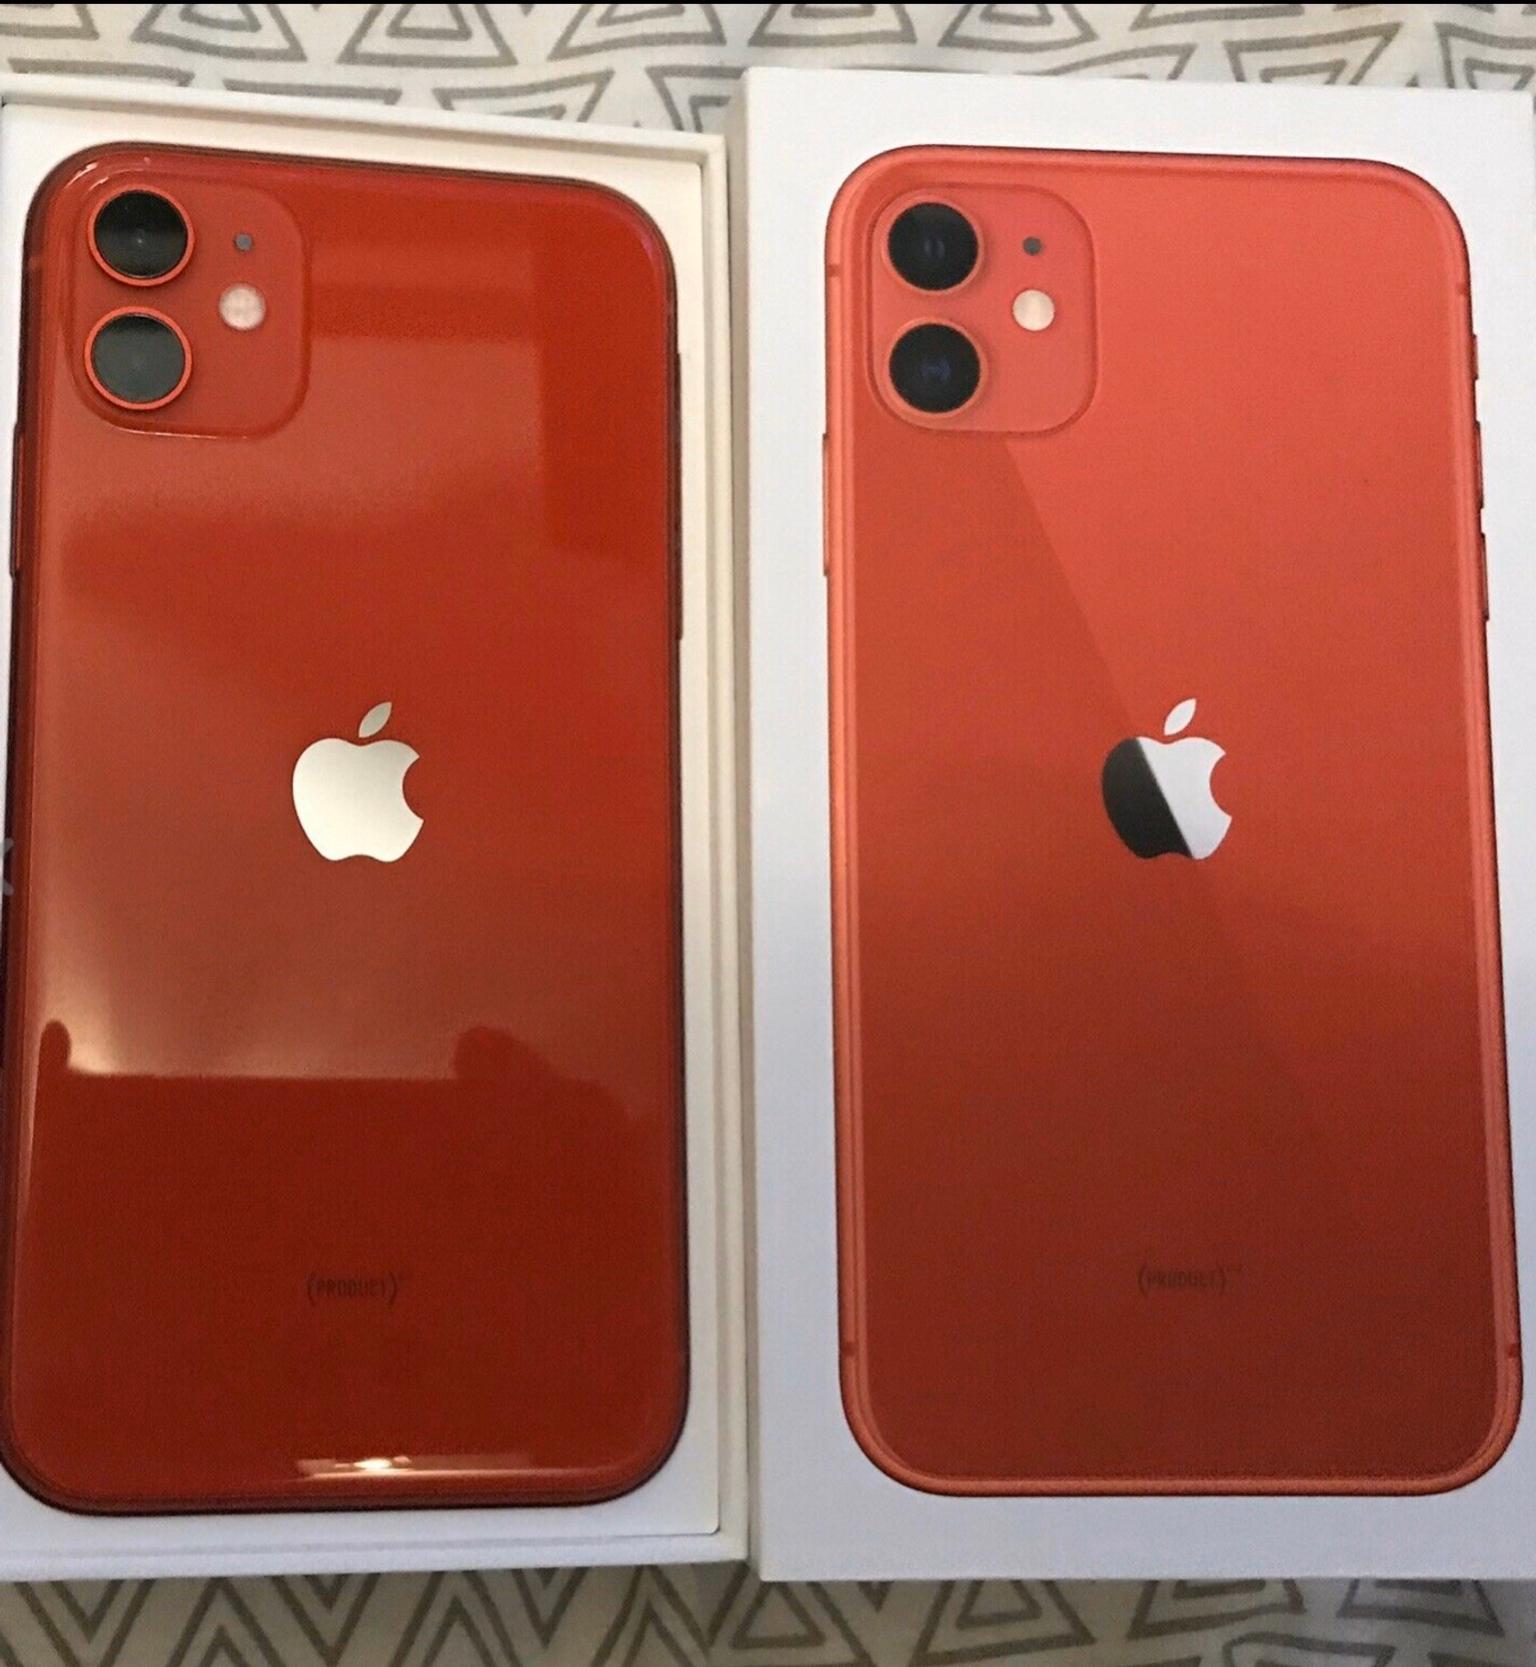 Iphone 11 Product Red In E15 London Borough Of Newham For 750 00 For Sale Shpock